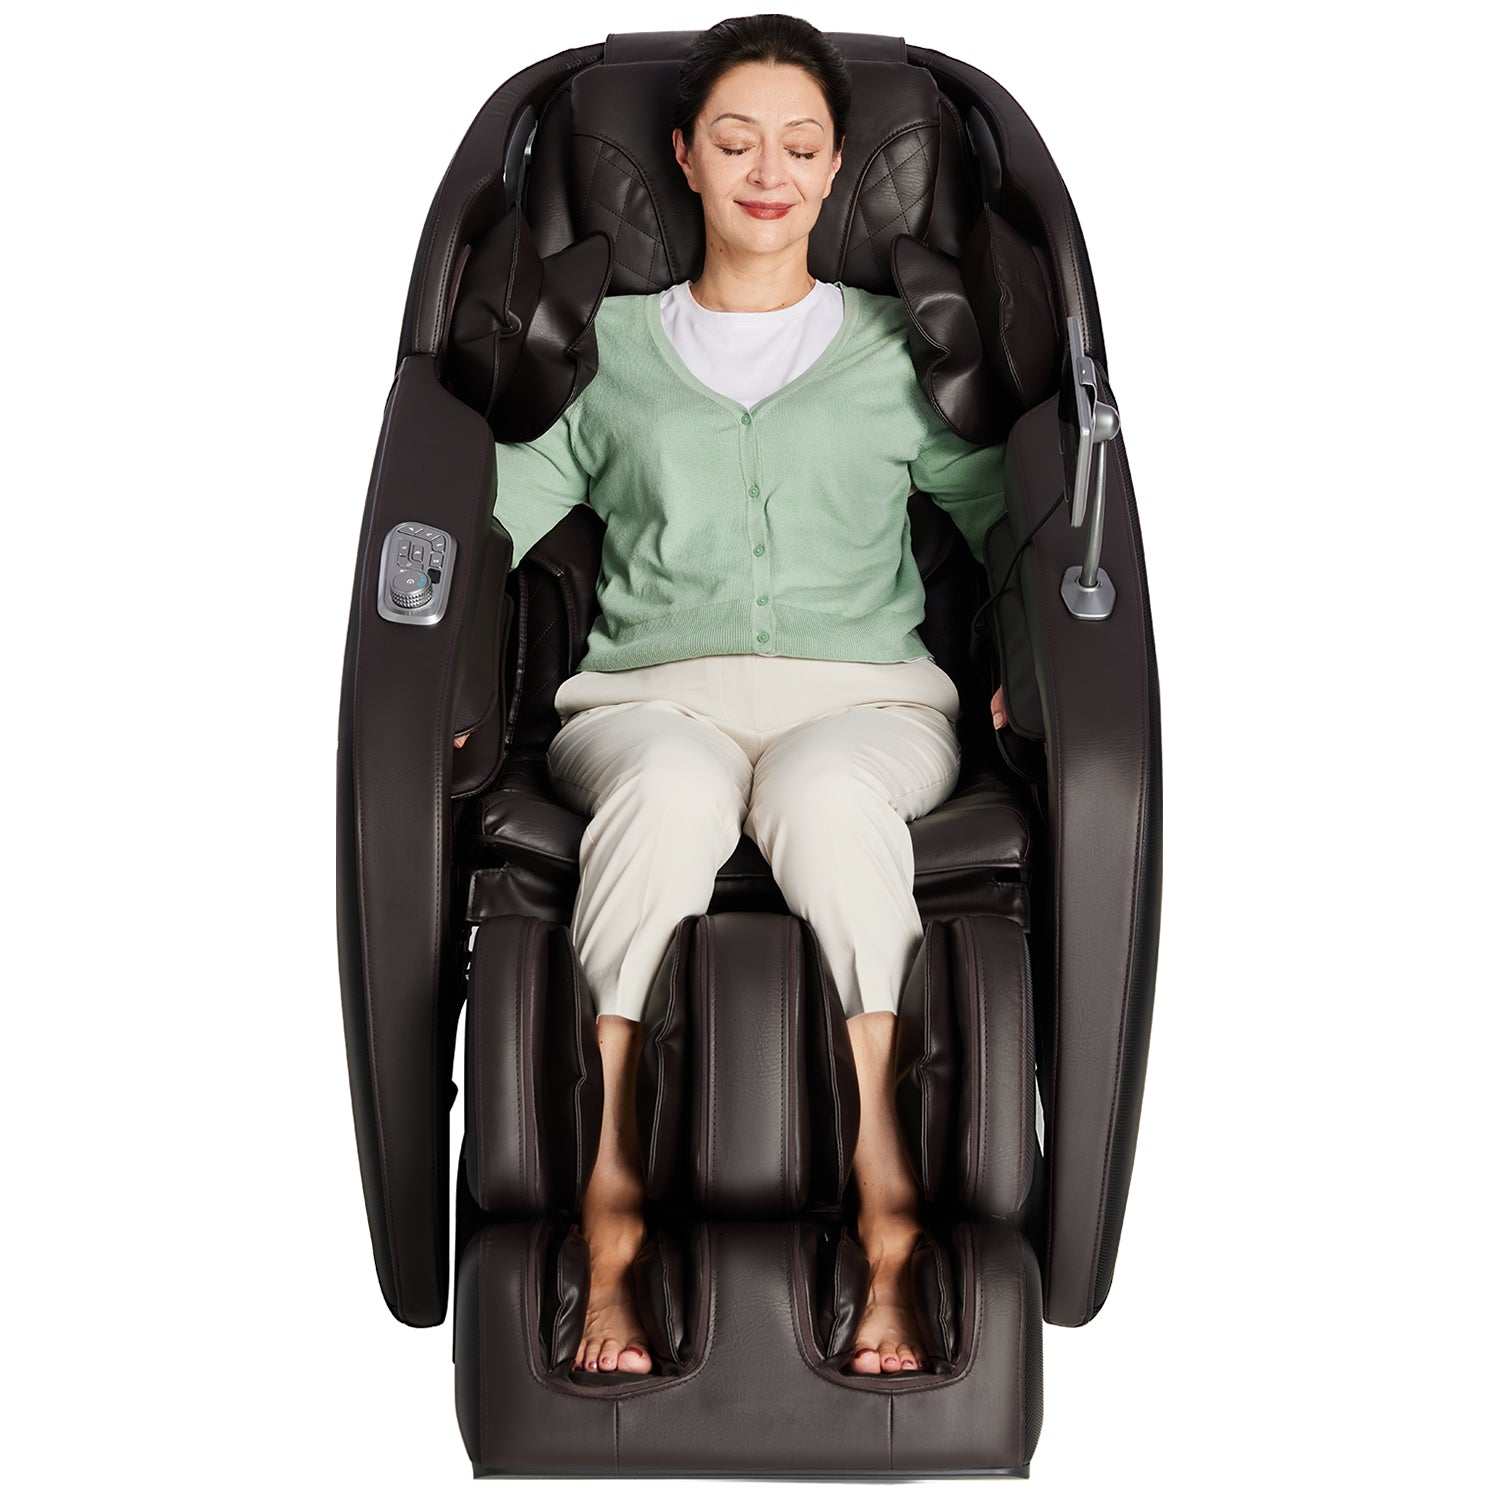 [Limited-Time Price] NEW ARRIVAL-iBooMas Upgraded Massage Chair Full Body with Shoulder Heat,APP Control, IT-9777